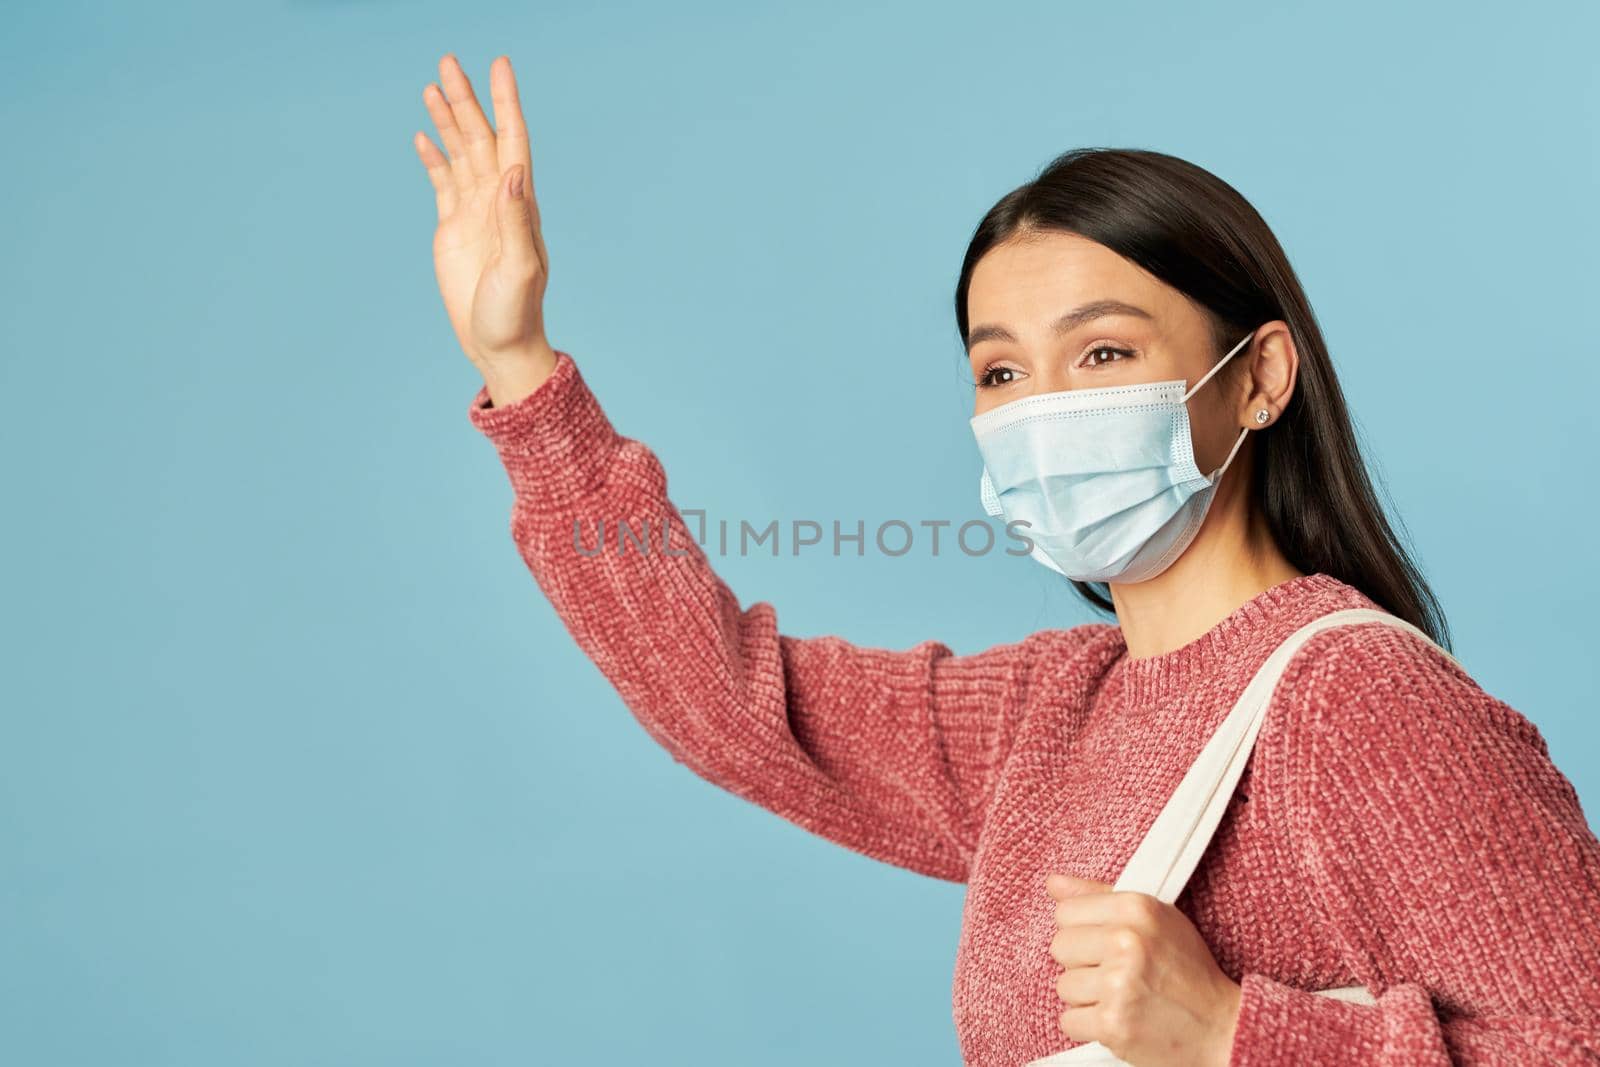 Waist up of beautiful young woman waving hand while wearing face mask and holding shopping bag. Copy space. Quarantine, coronavirus concept